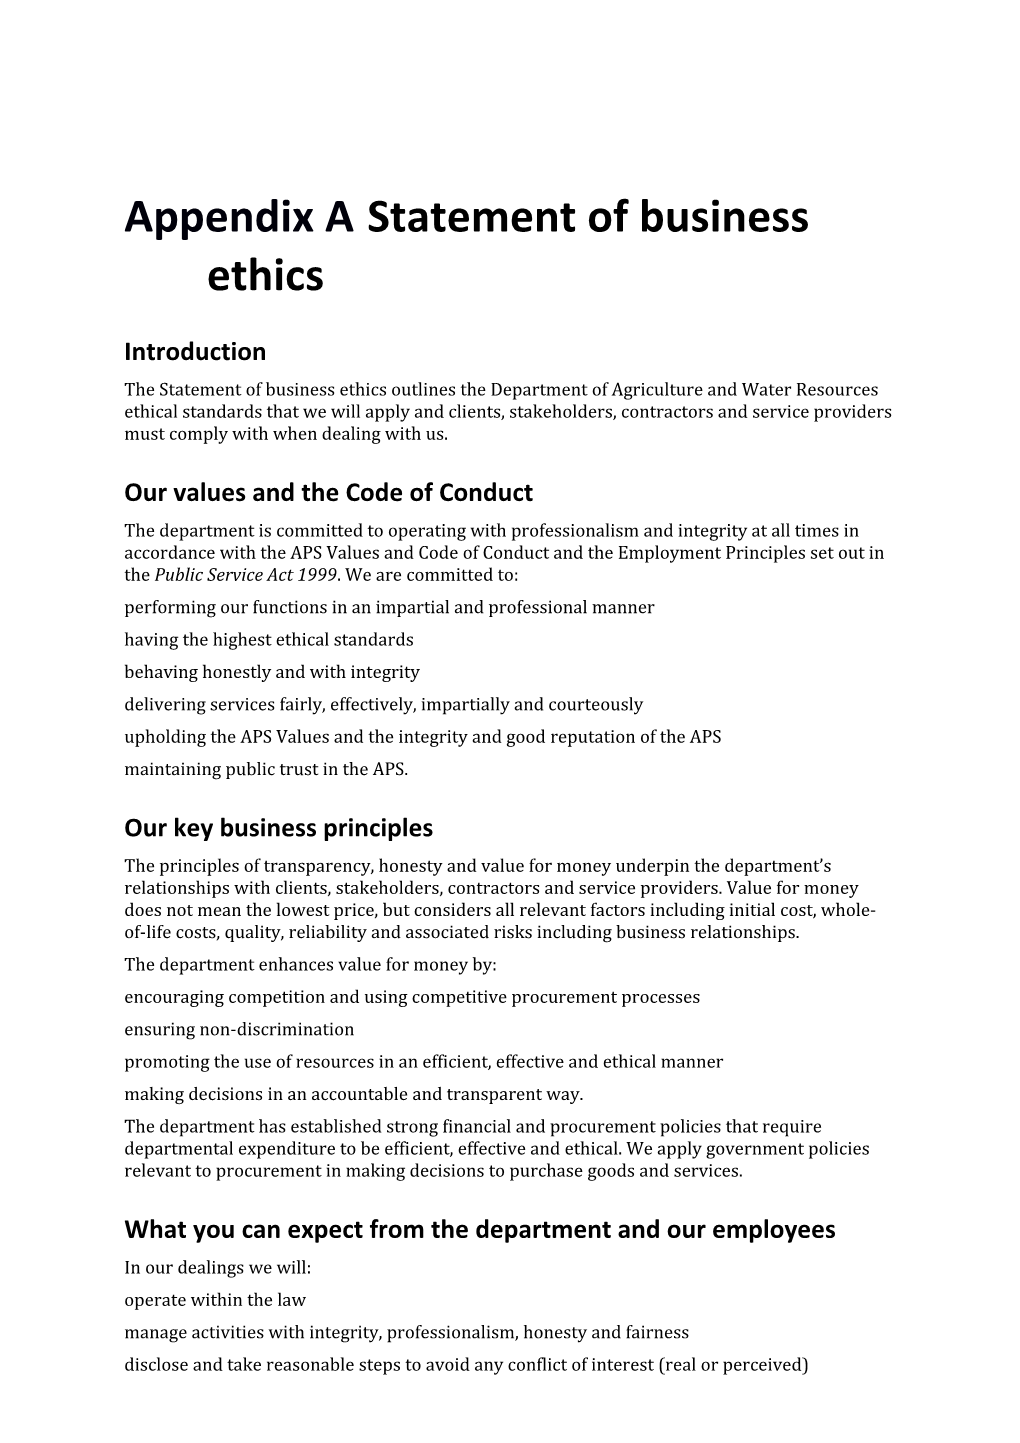 Statement of Business Ethics